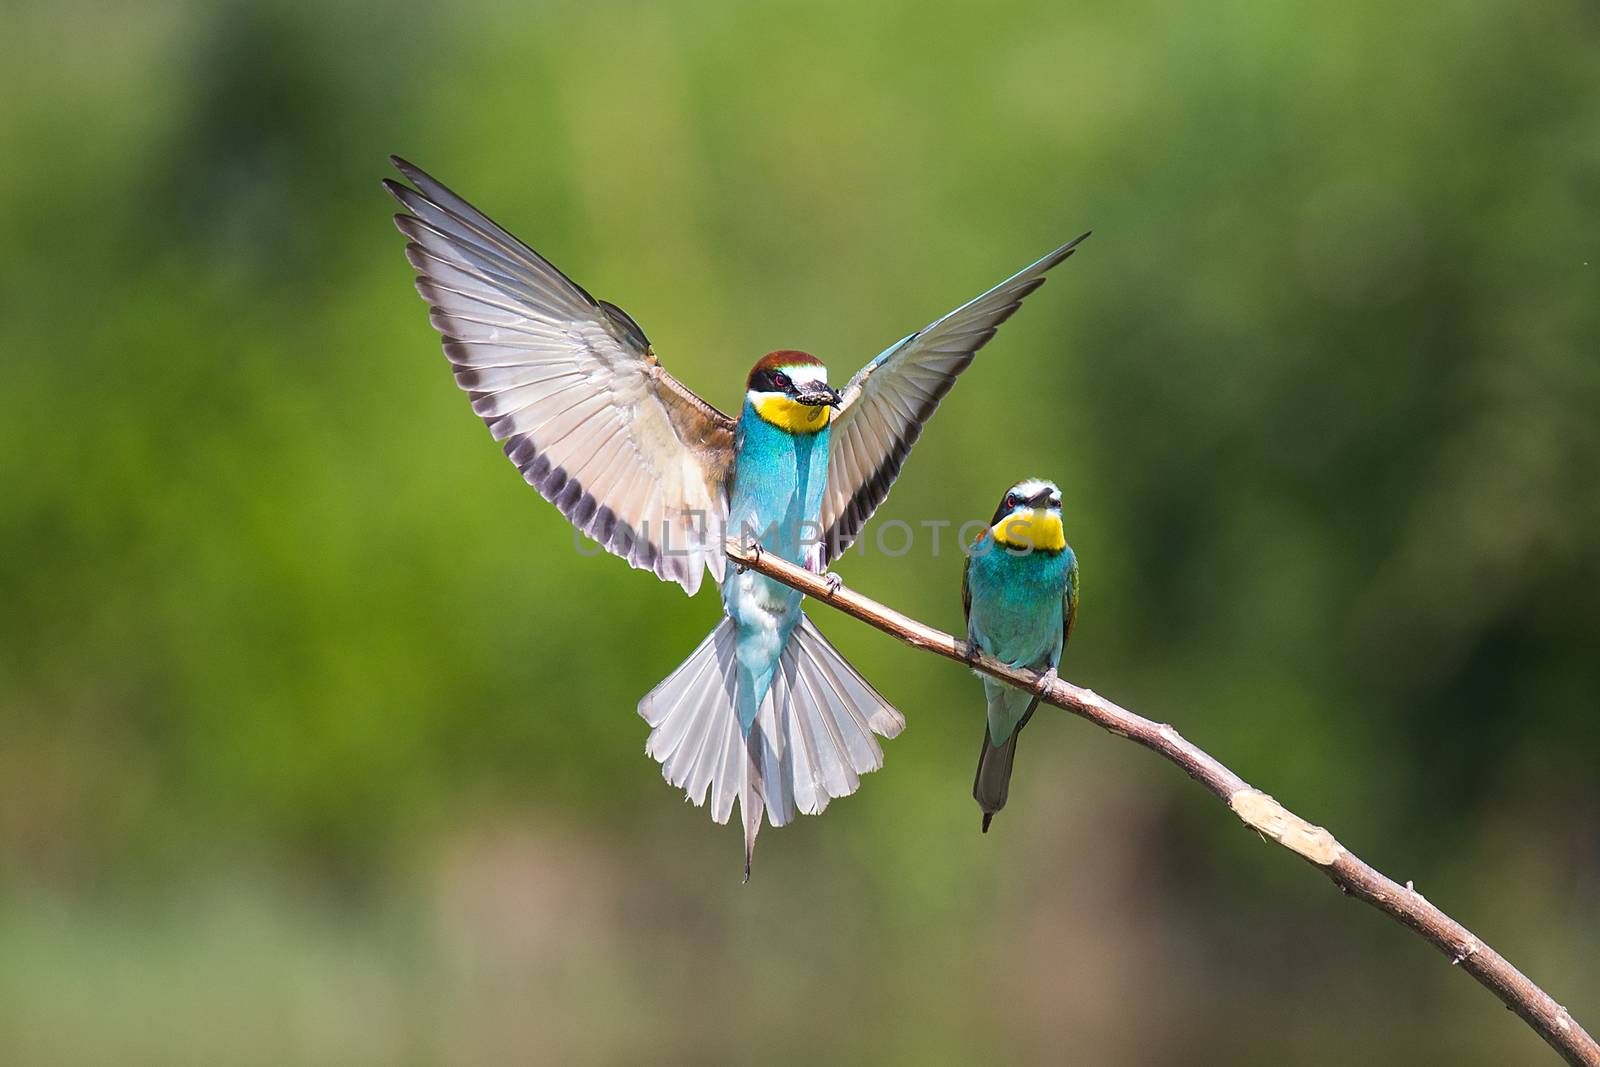 European Bee-eater fight (Merops apiaster) on brunch - Bird Male with Female, Isola della Cona, Monfalcone, Italy, Europe